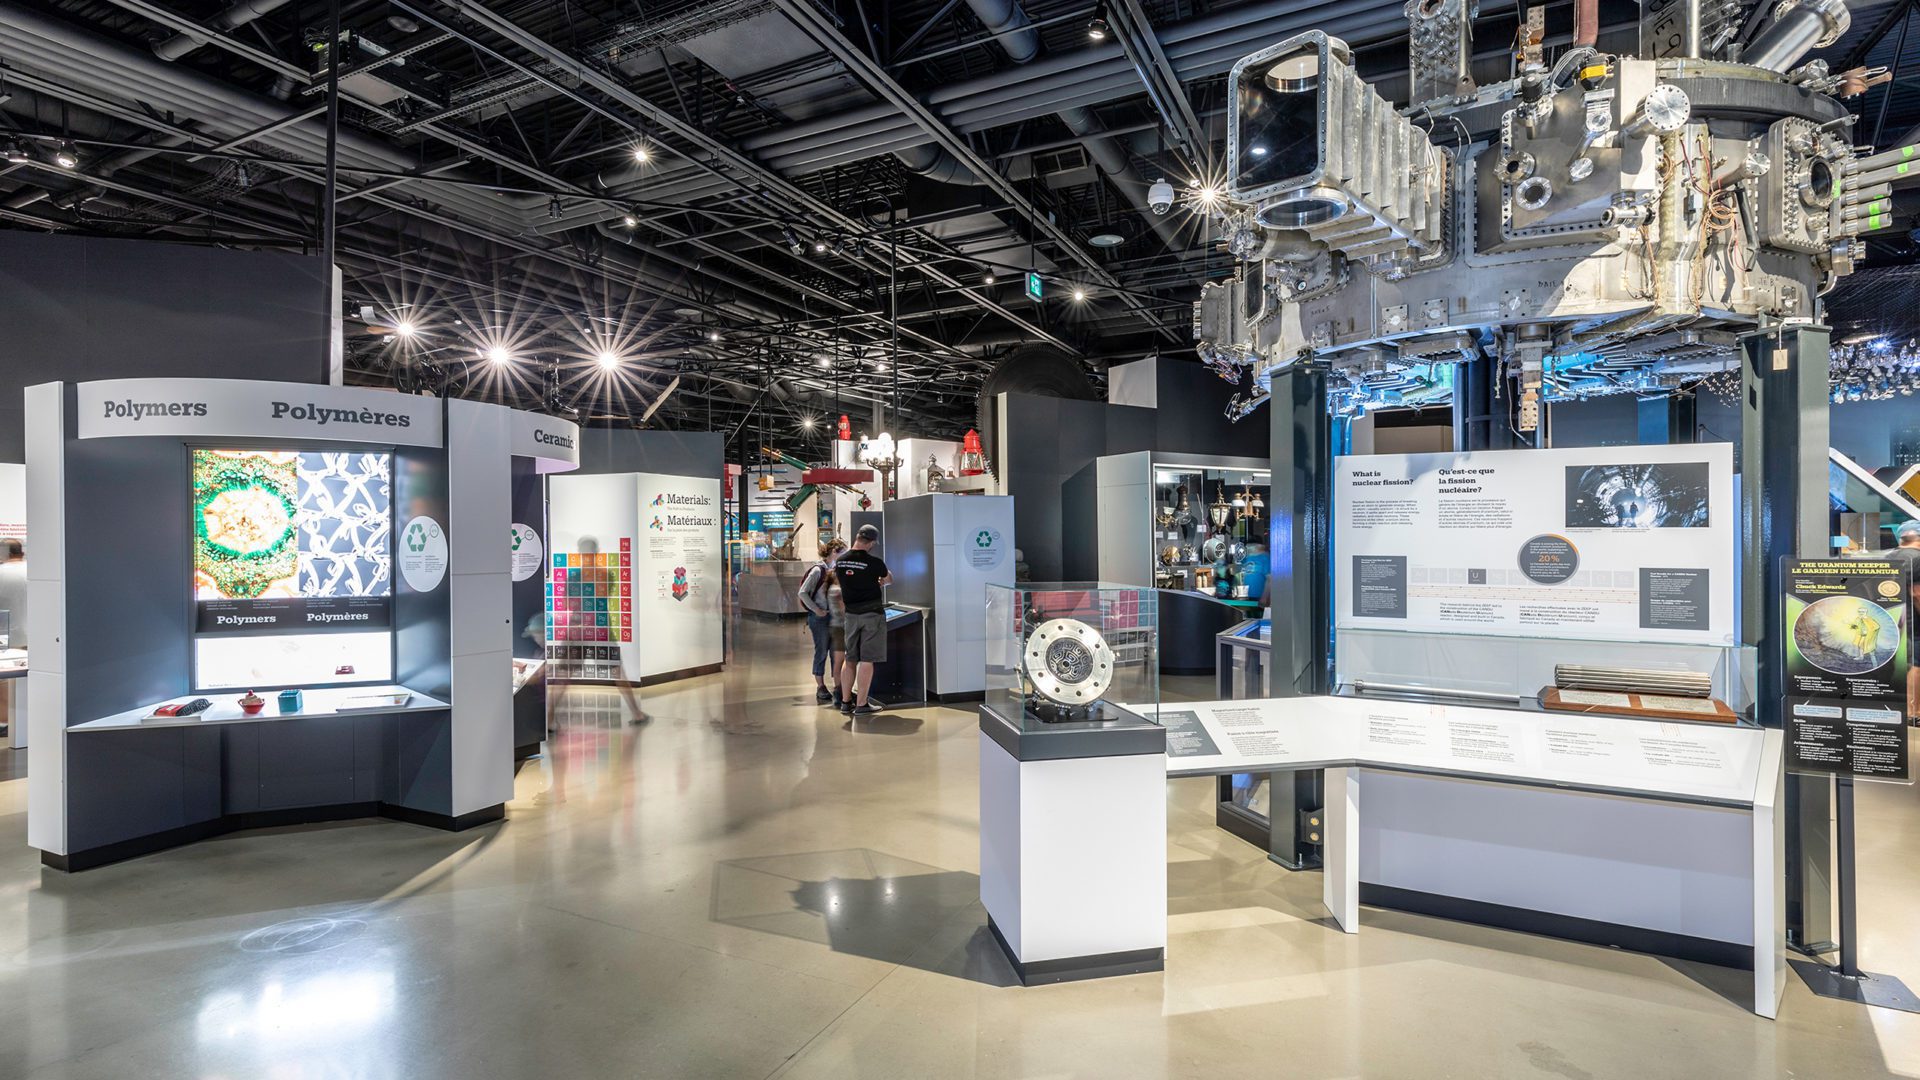 polymers and materials exhibition at the canadian science and technology museum in ottawa ontario